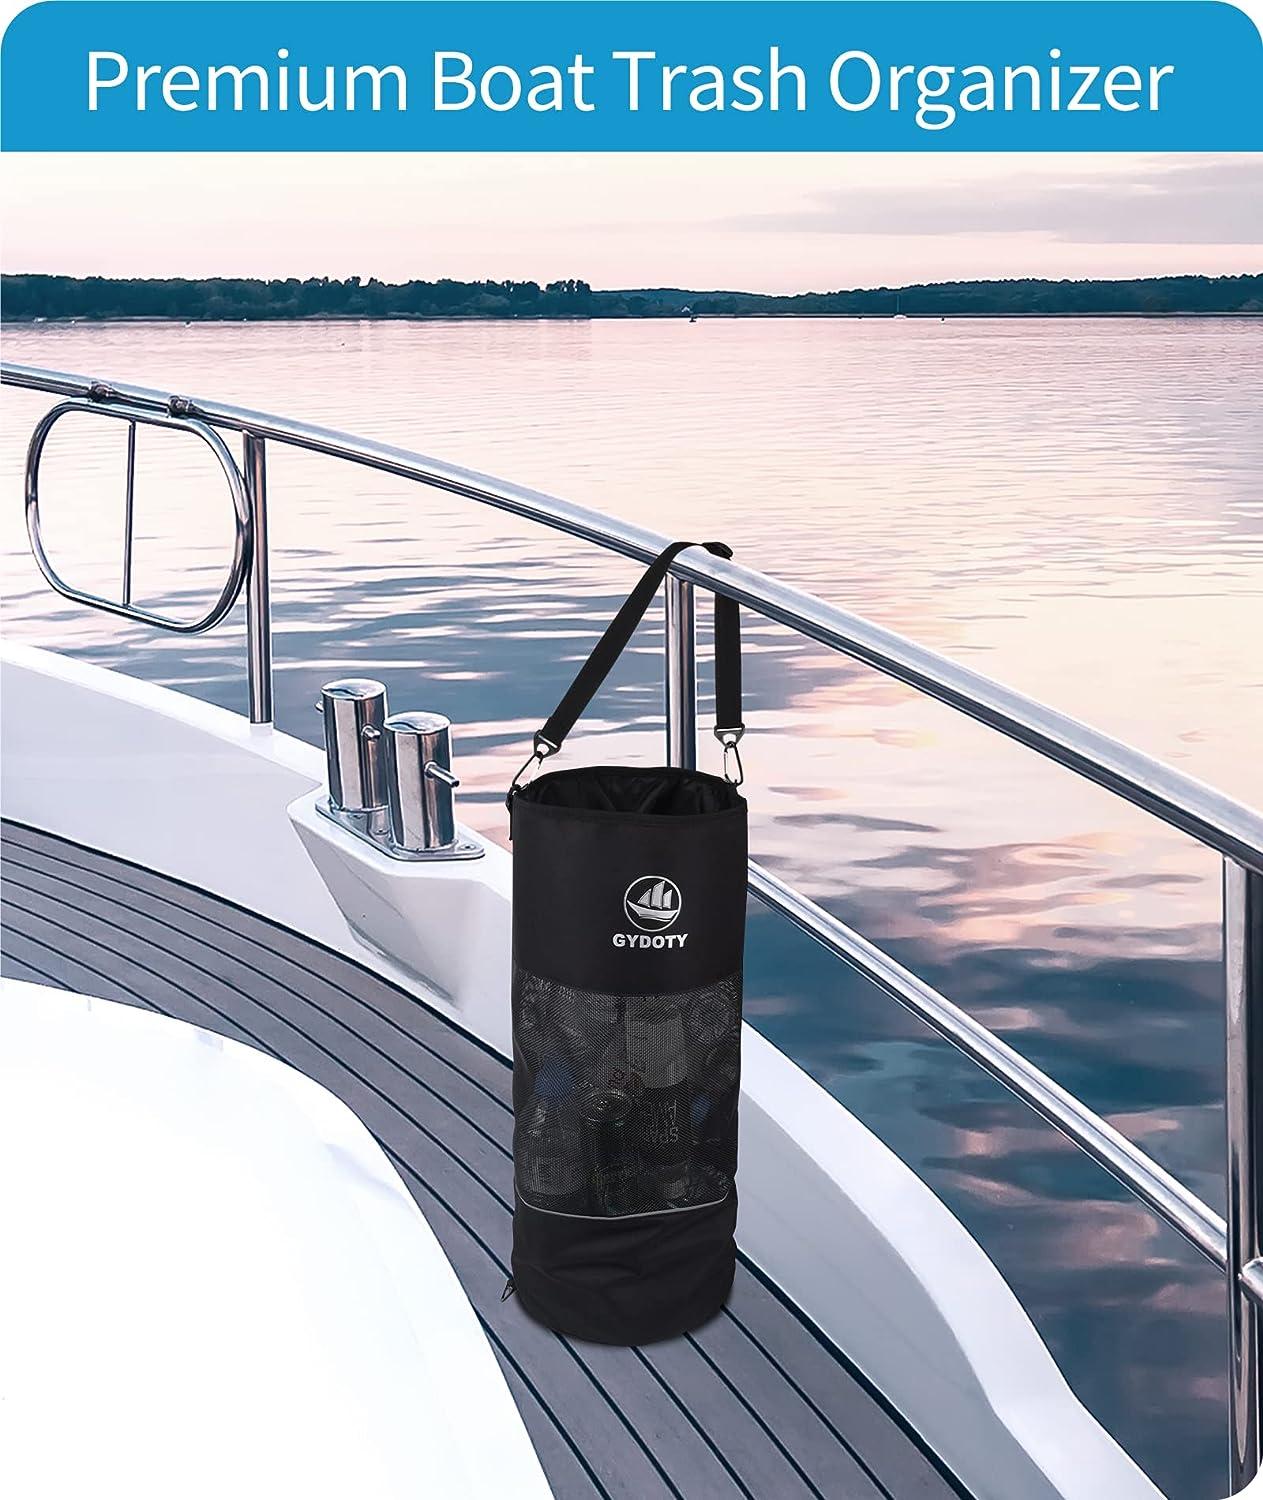 Gydoty Boat Trash Bag Can - Boat Accessories Gifts for Men Boating Must  Haves Reusable Mesh Boat Garbage Container(Black,YKK Long Zipper) YKK long  Zipper,black